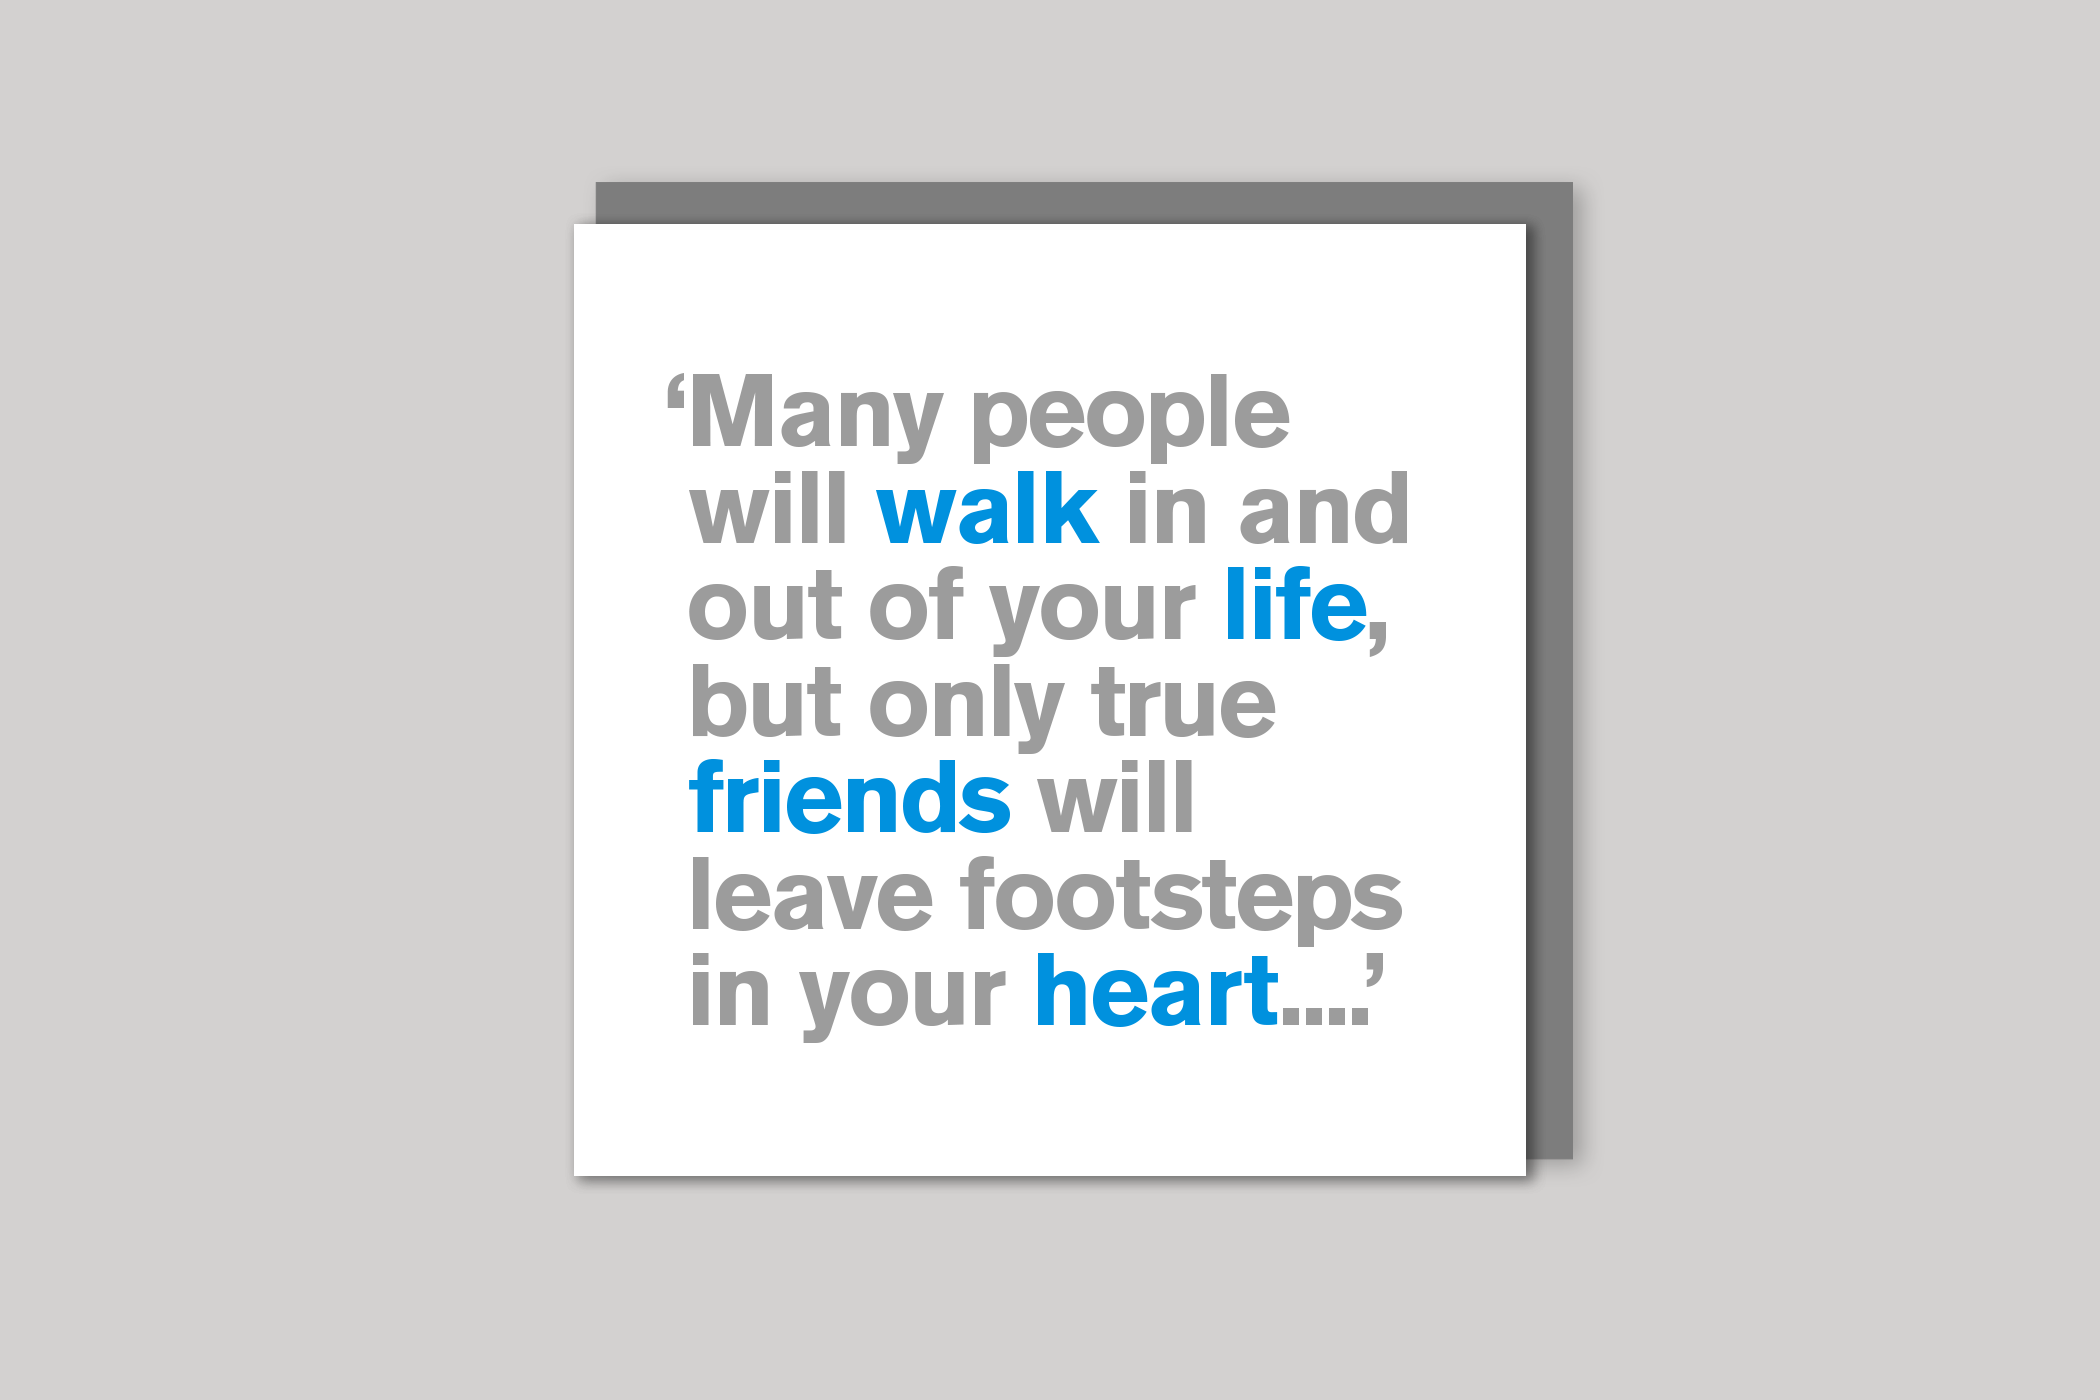 Footsteps in Your Heart from Lyric range of quotation cards by Icon, back page.